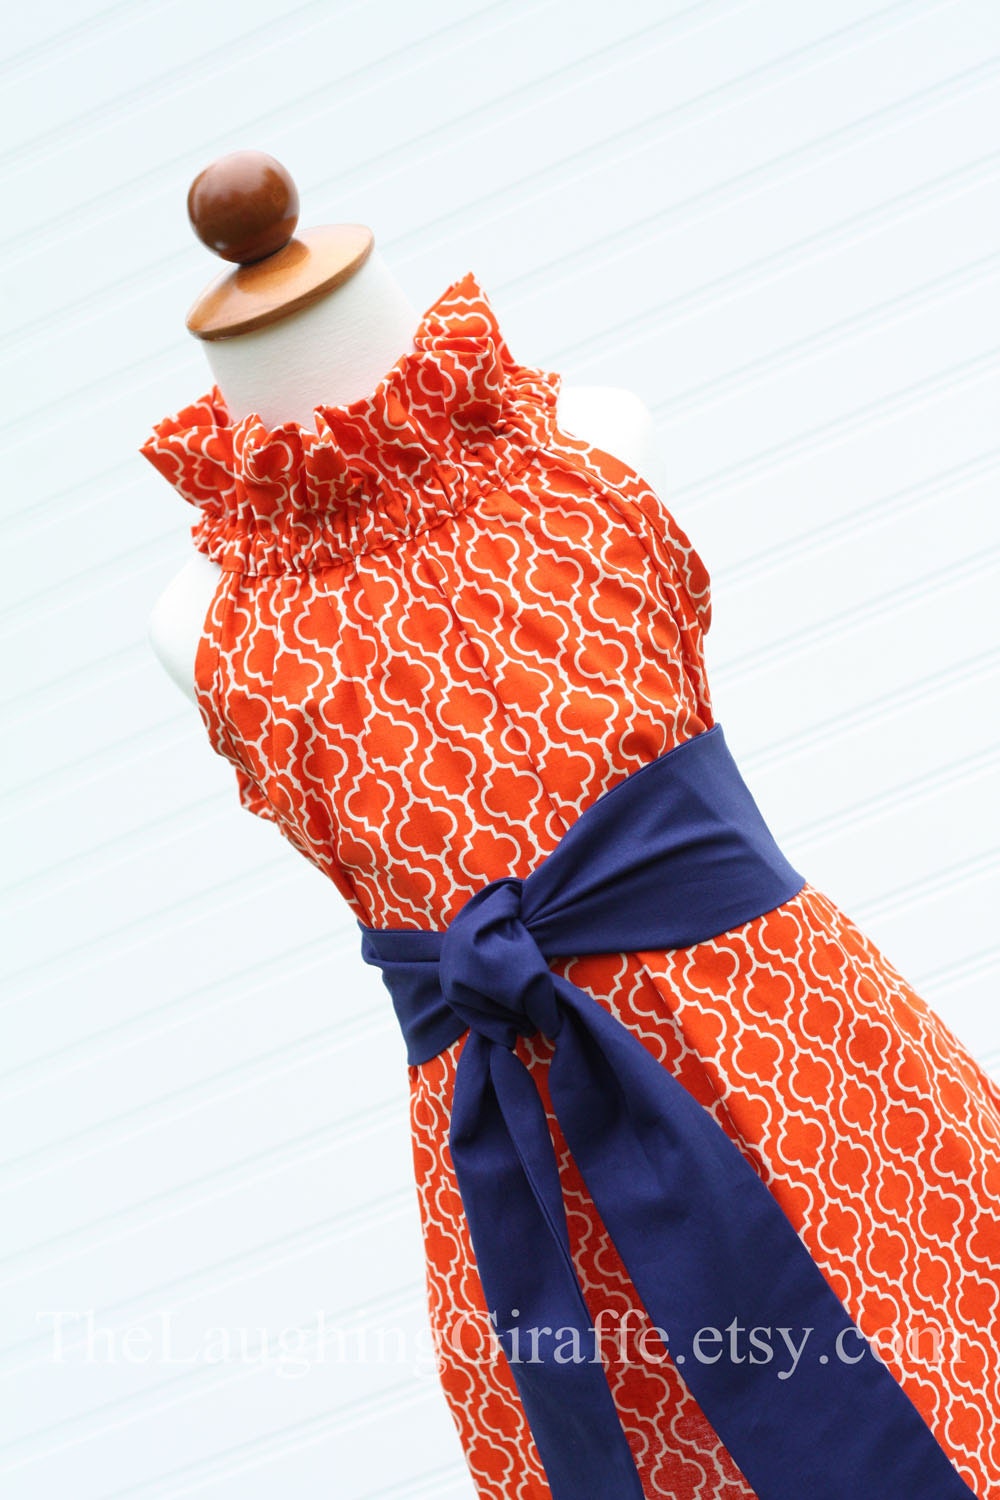 NEW - Tangerine Delight...Ruffler Dress with Removable Sash...Size 3, 6, 9, 12 months, 1, 2, 3, 4, 5, 6, 7/8, 9/10, 11/12